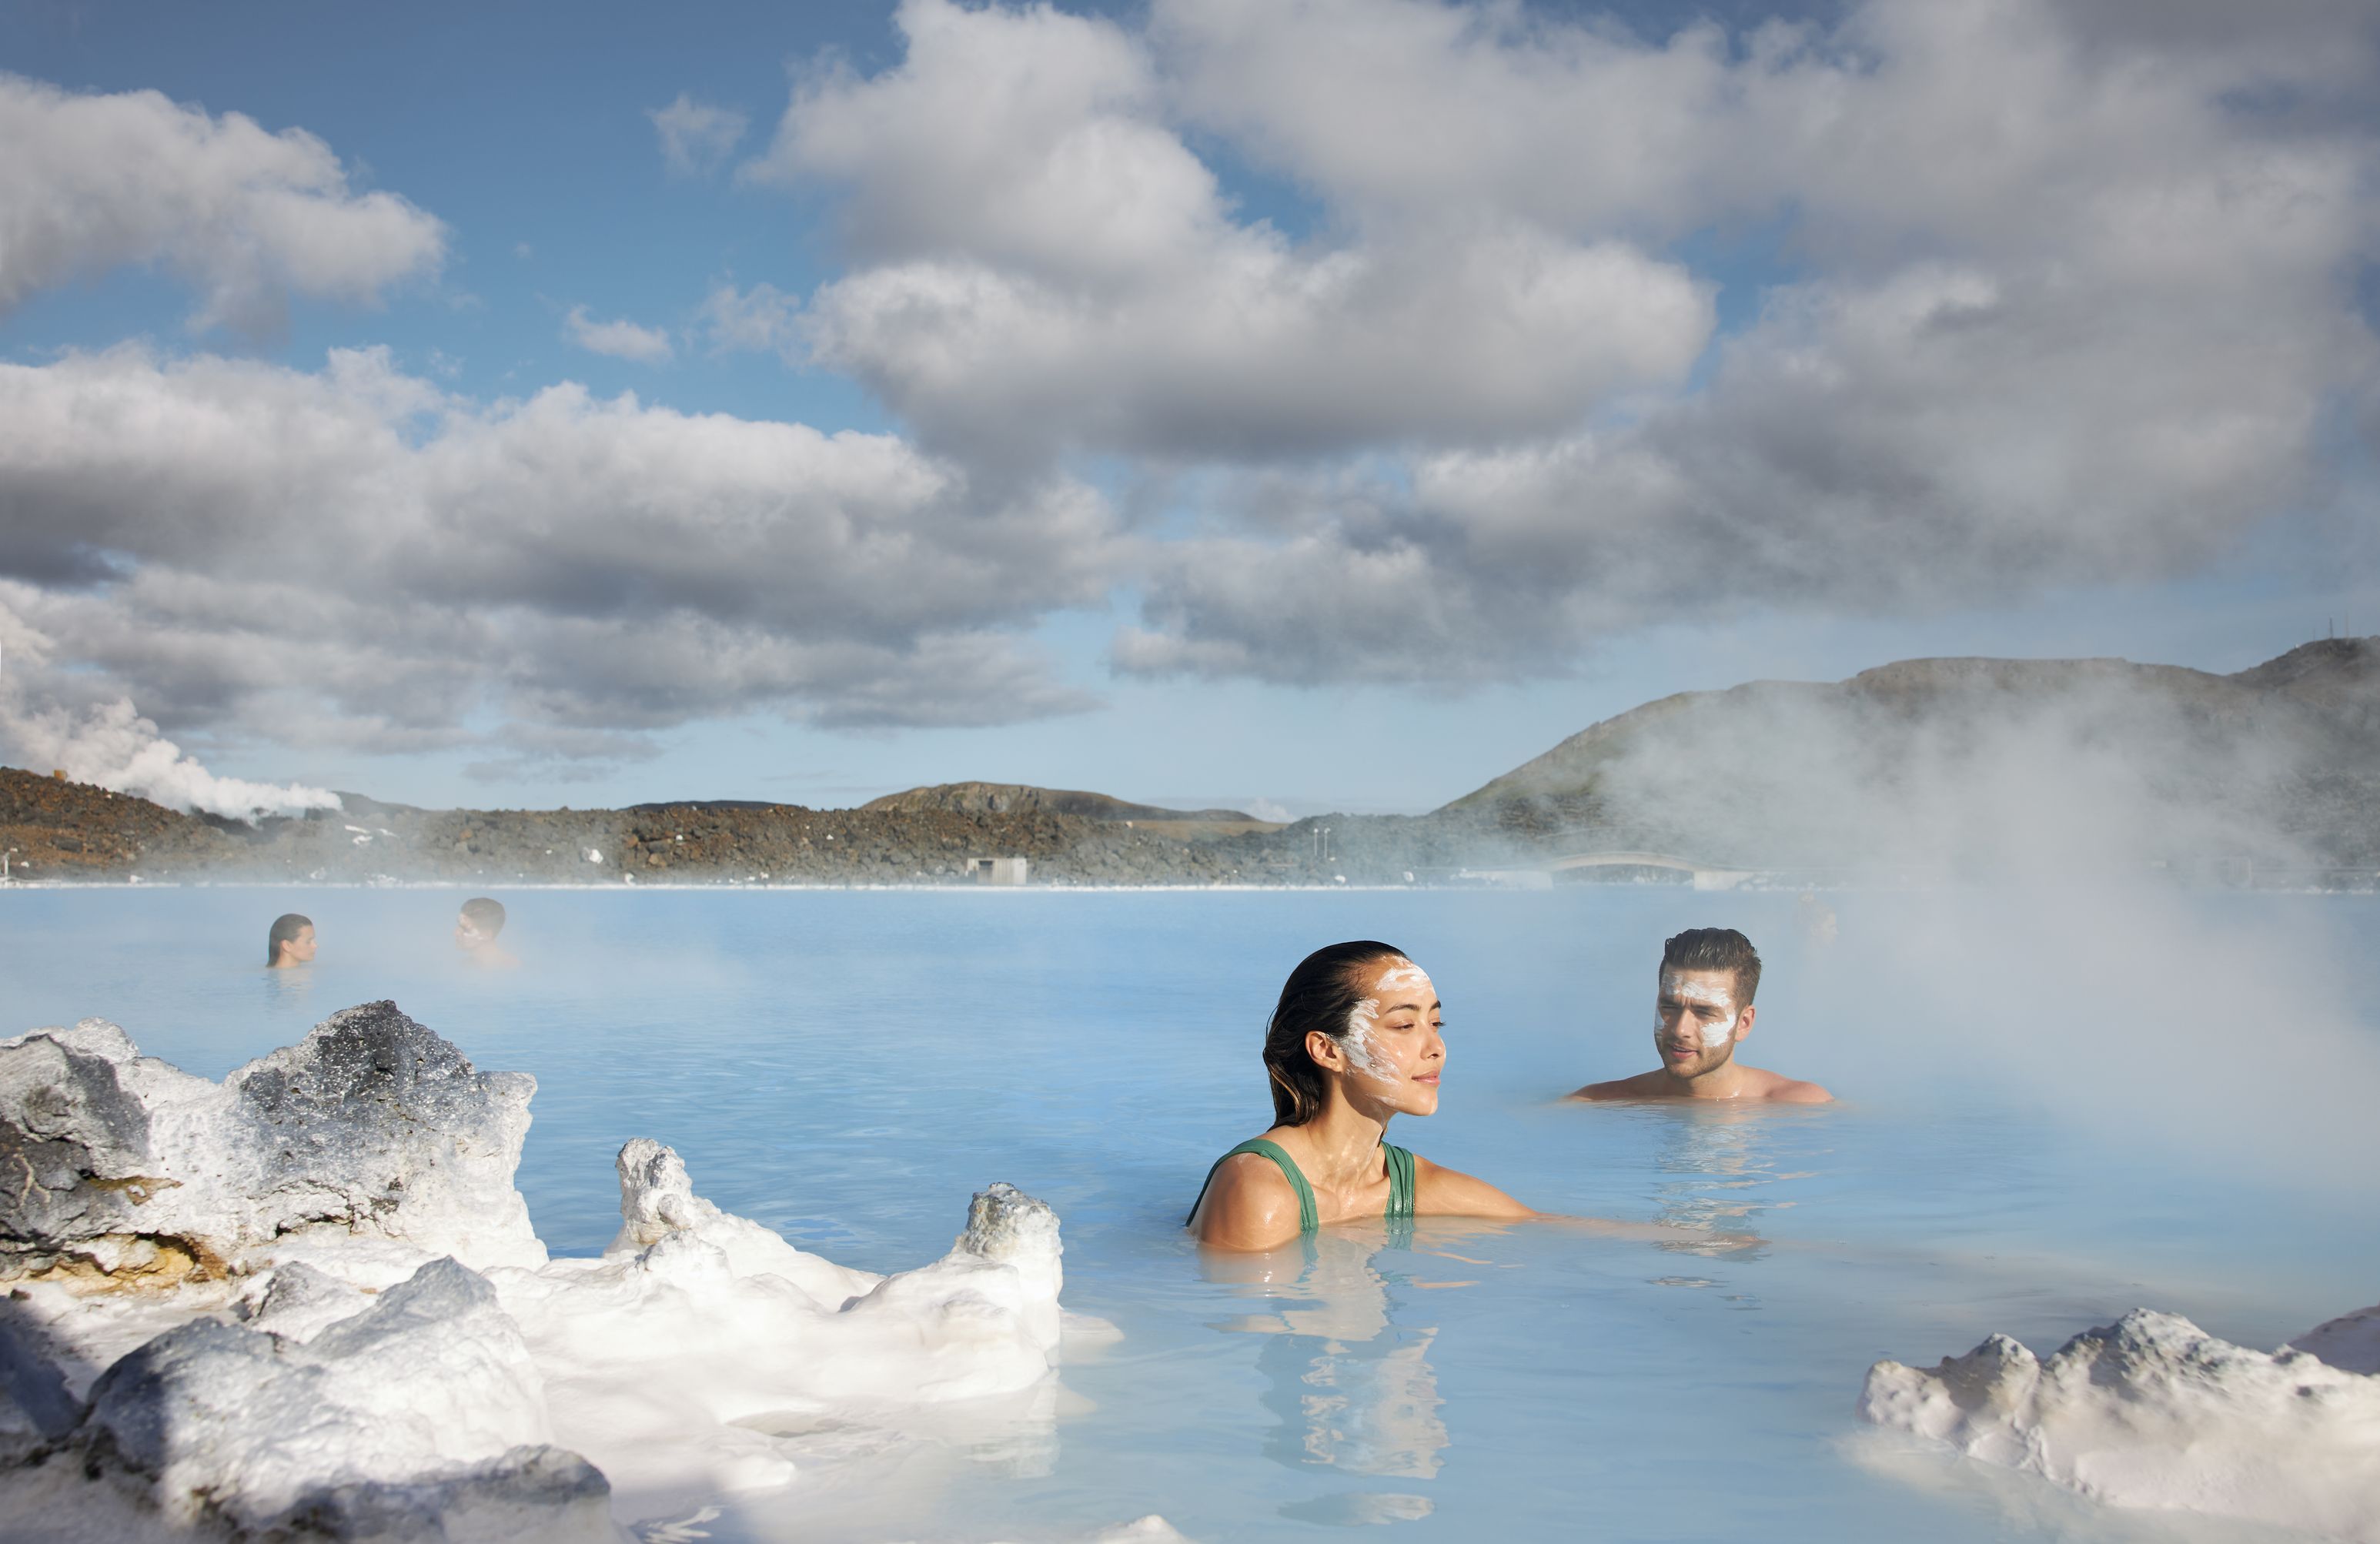 18 Things to Know Before You Visit the Blue Lagoon Iceland